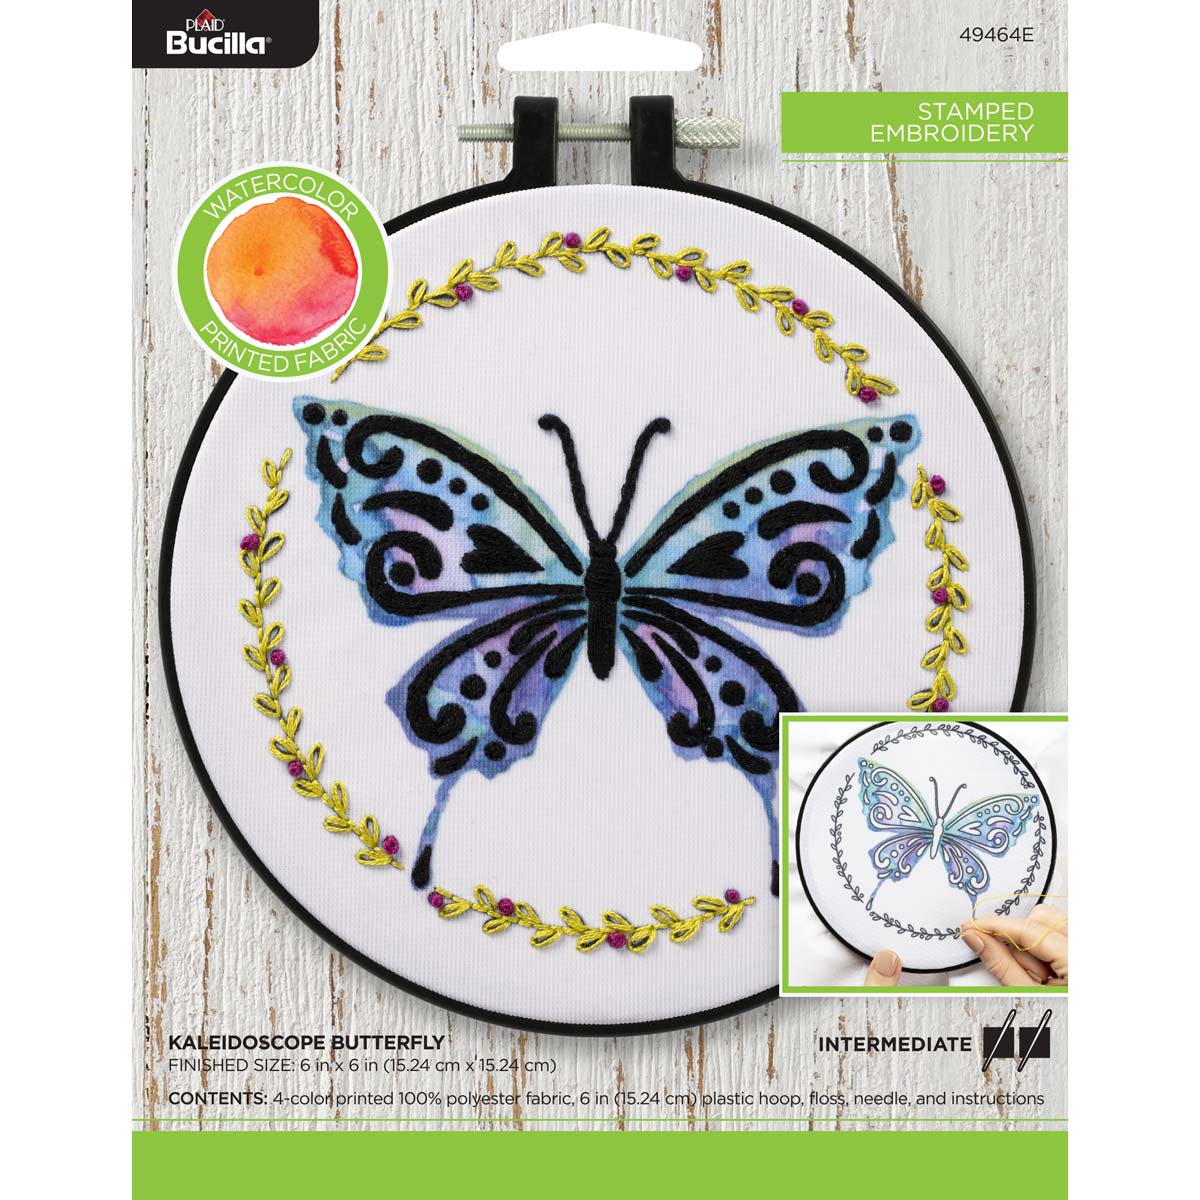 Shop Plaid Bucilla ® Stamped Embroidery - Watercolor - Kaleidoscope  Butterfly - 49464E - 49464E